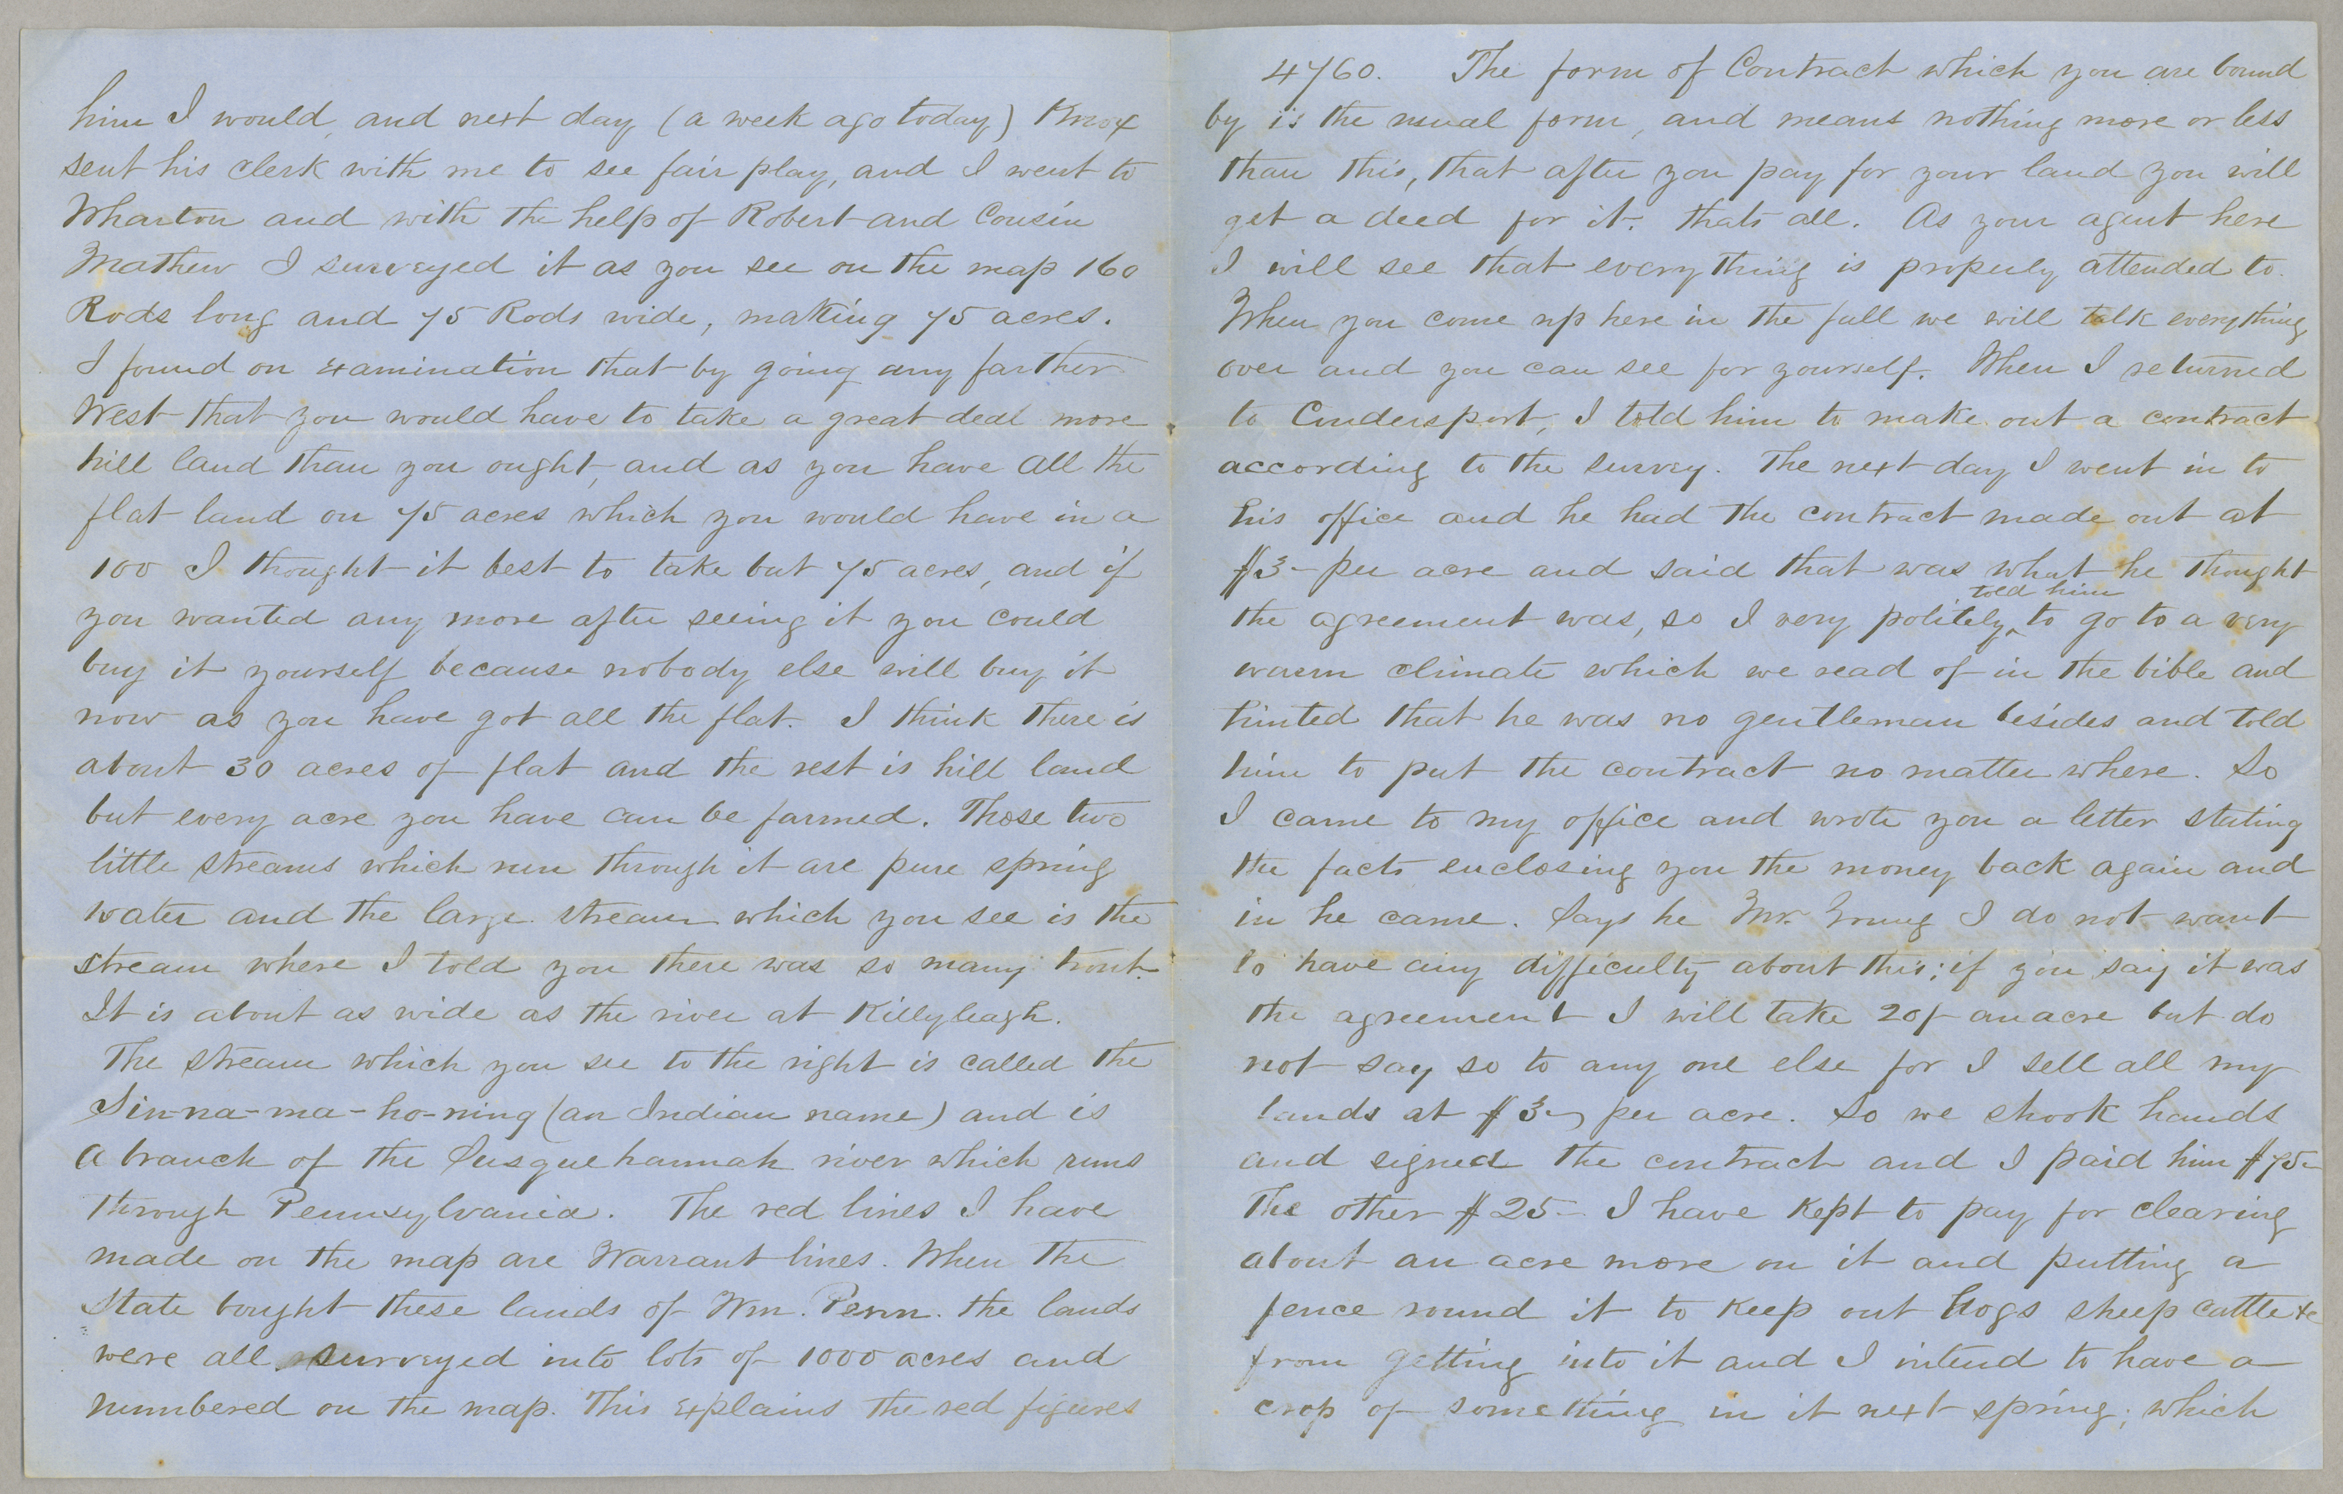 Letter. Hugh Young, Coudersport, Pennsylvania, to "Dear Johnny" [John E. Brownlee], n. p., Pages 2-3